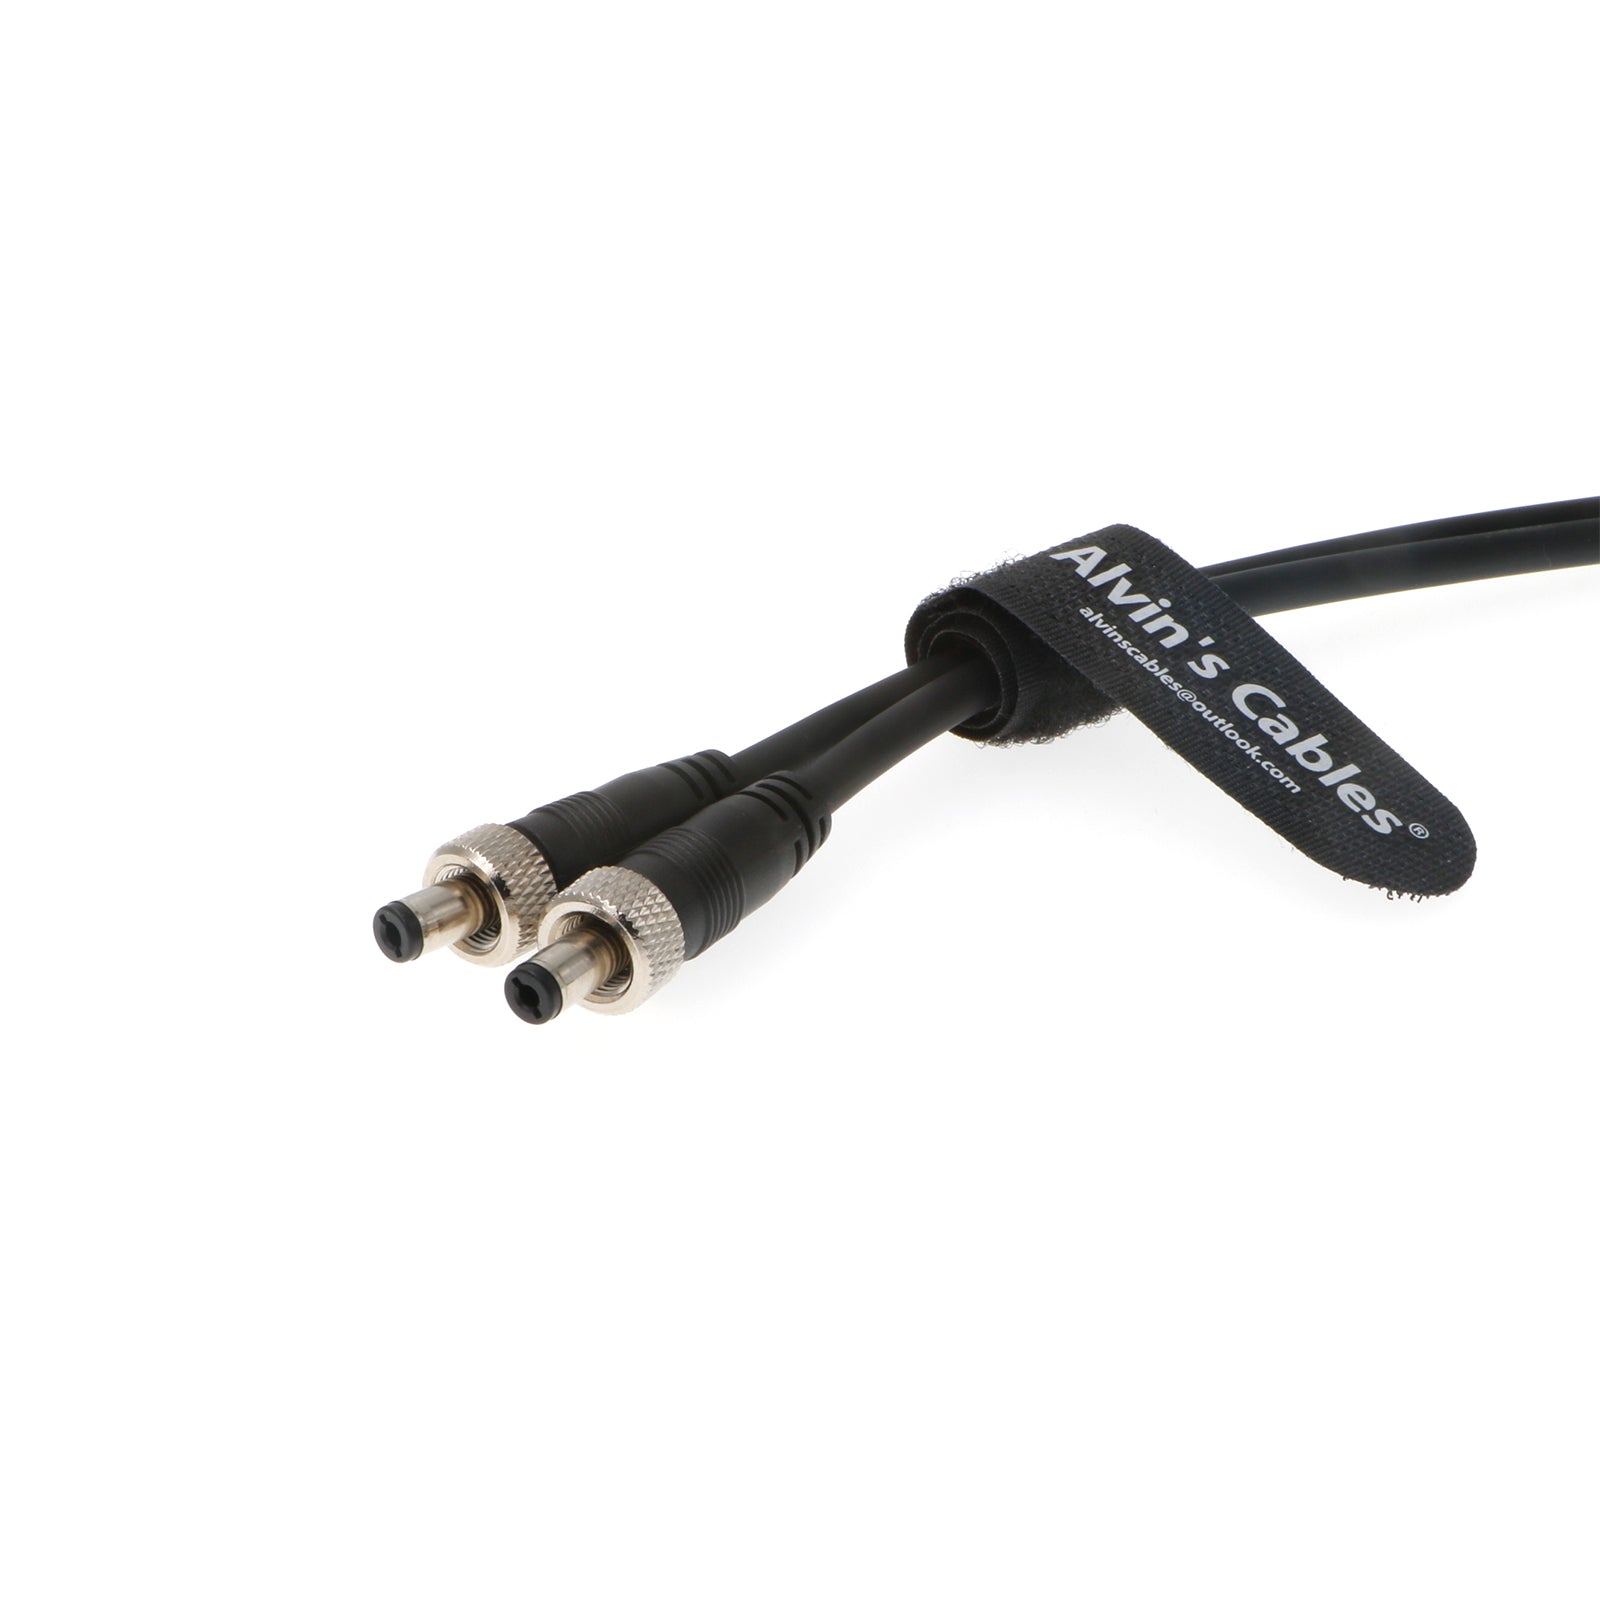 Power-Cable for Lectrosonics-Receivers Hirose 4 Pin Male to Dual Lock DC Cable Alvin’s Cables 50CM|20inches